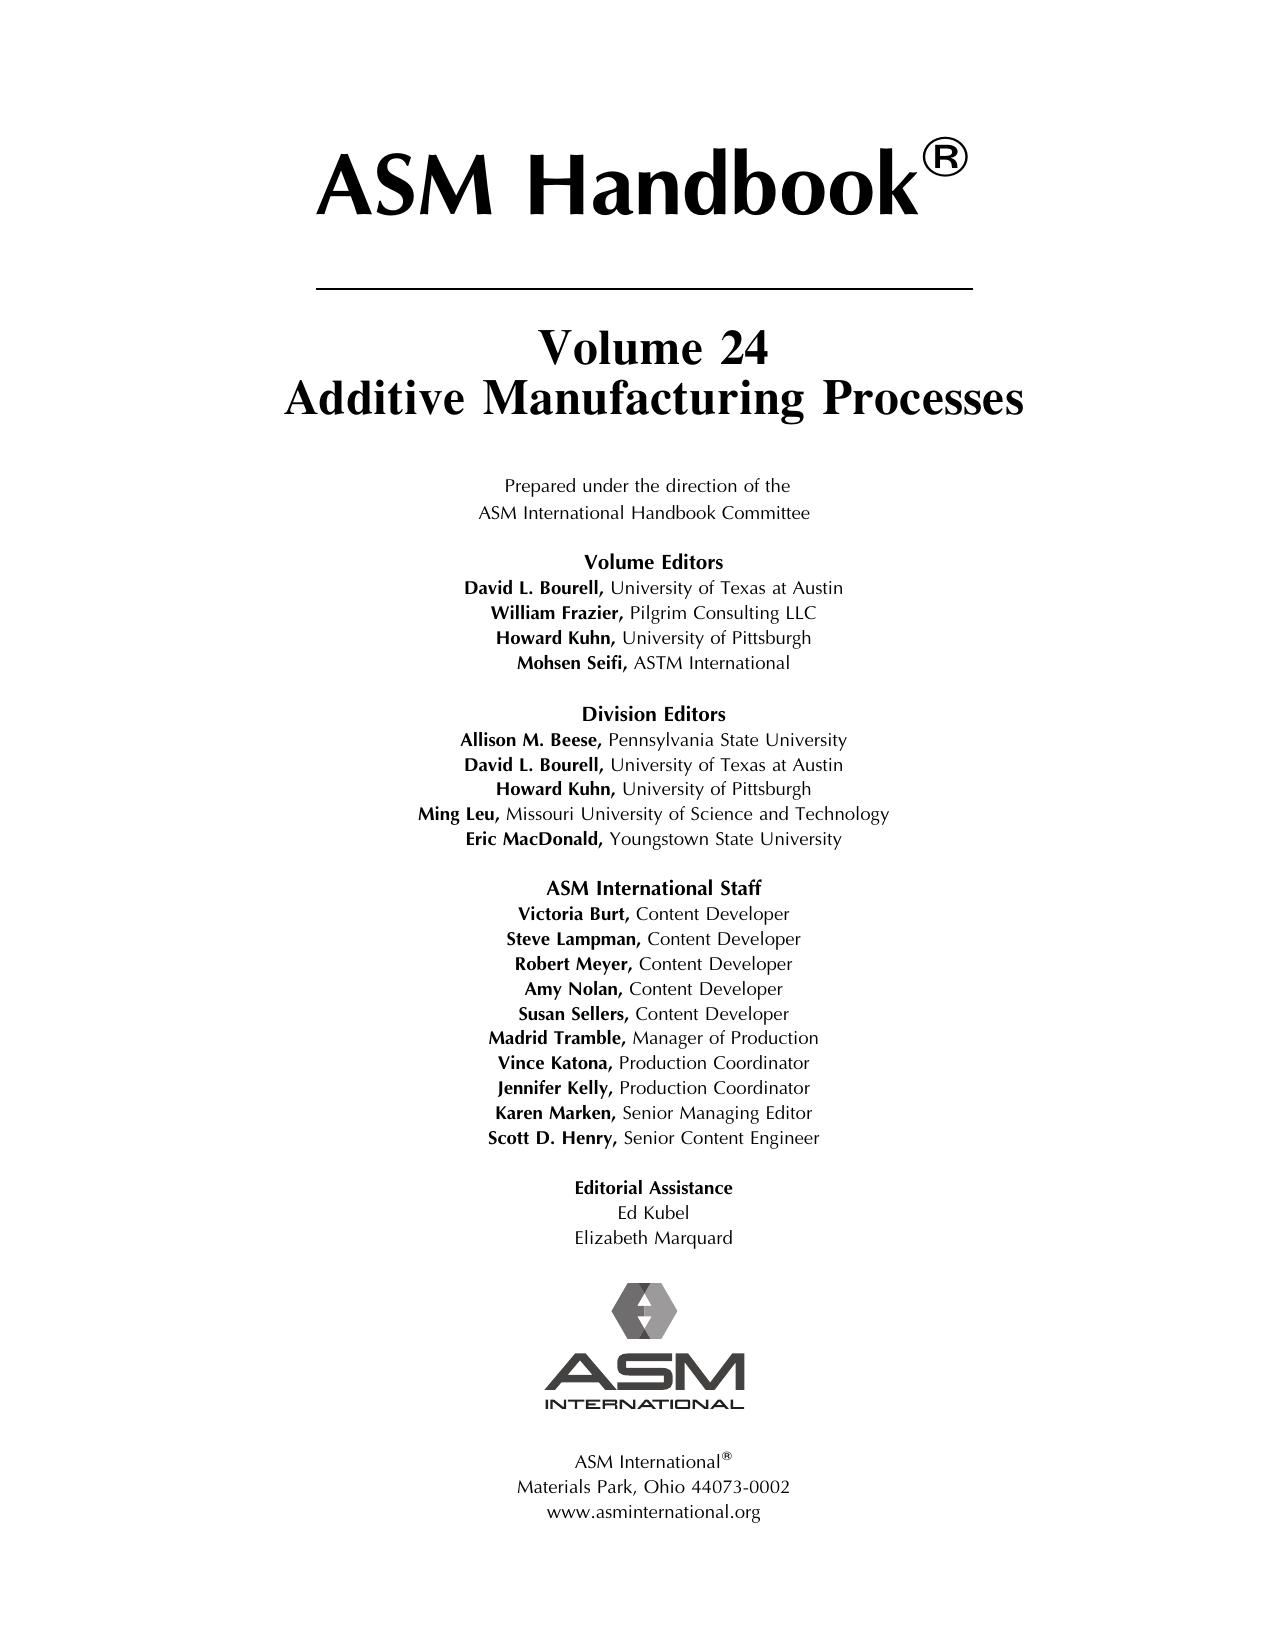 ASM Handbook, Volume 24: Additive Manufacturing Processes by unknow